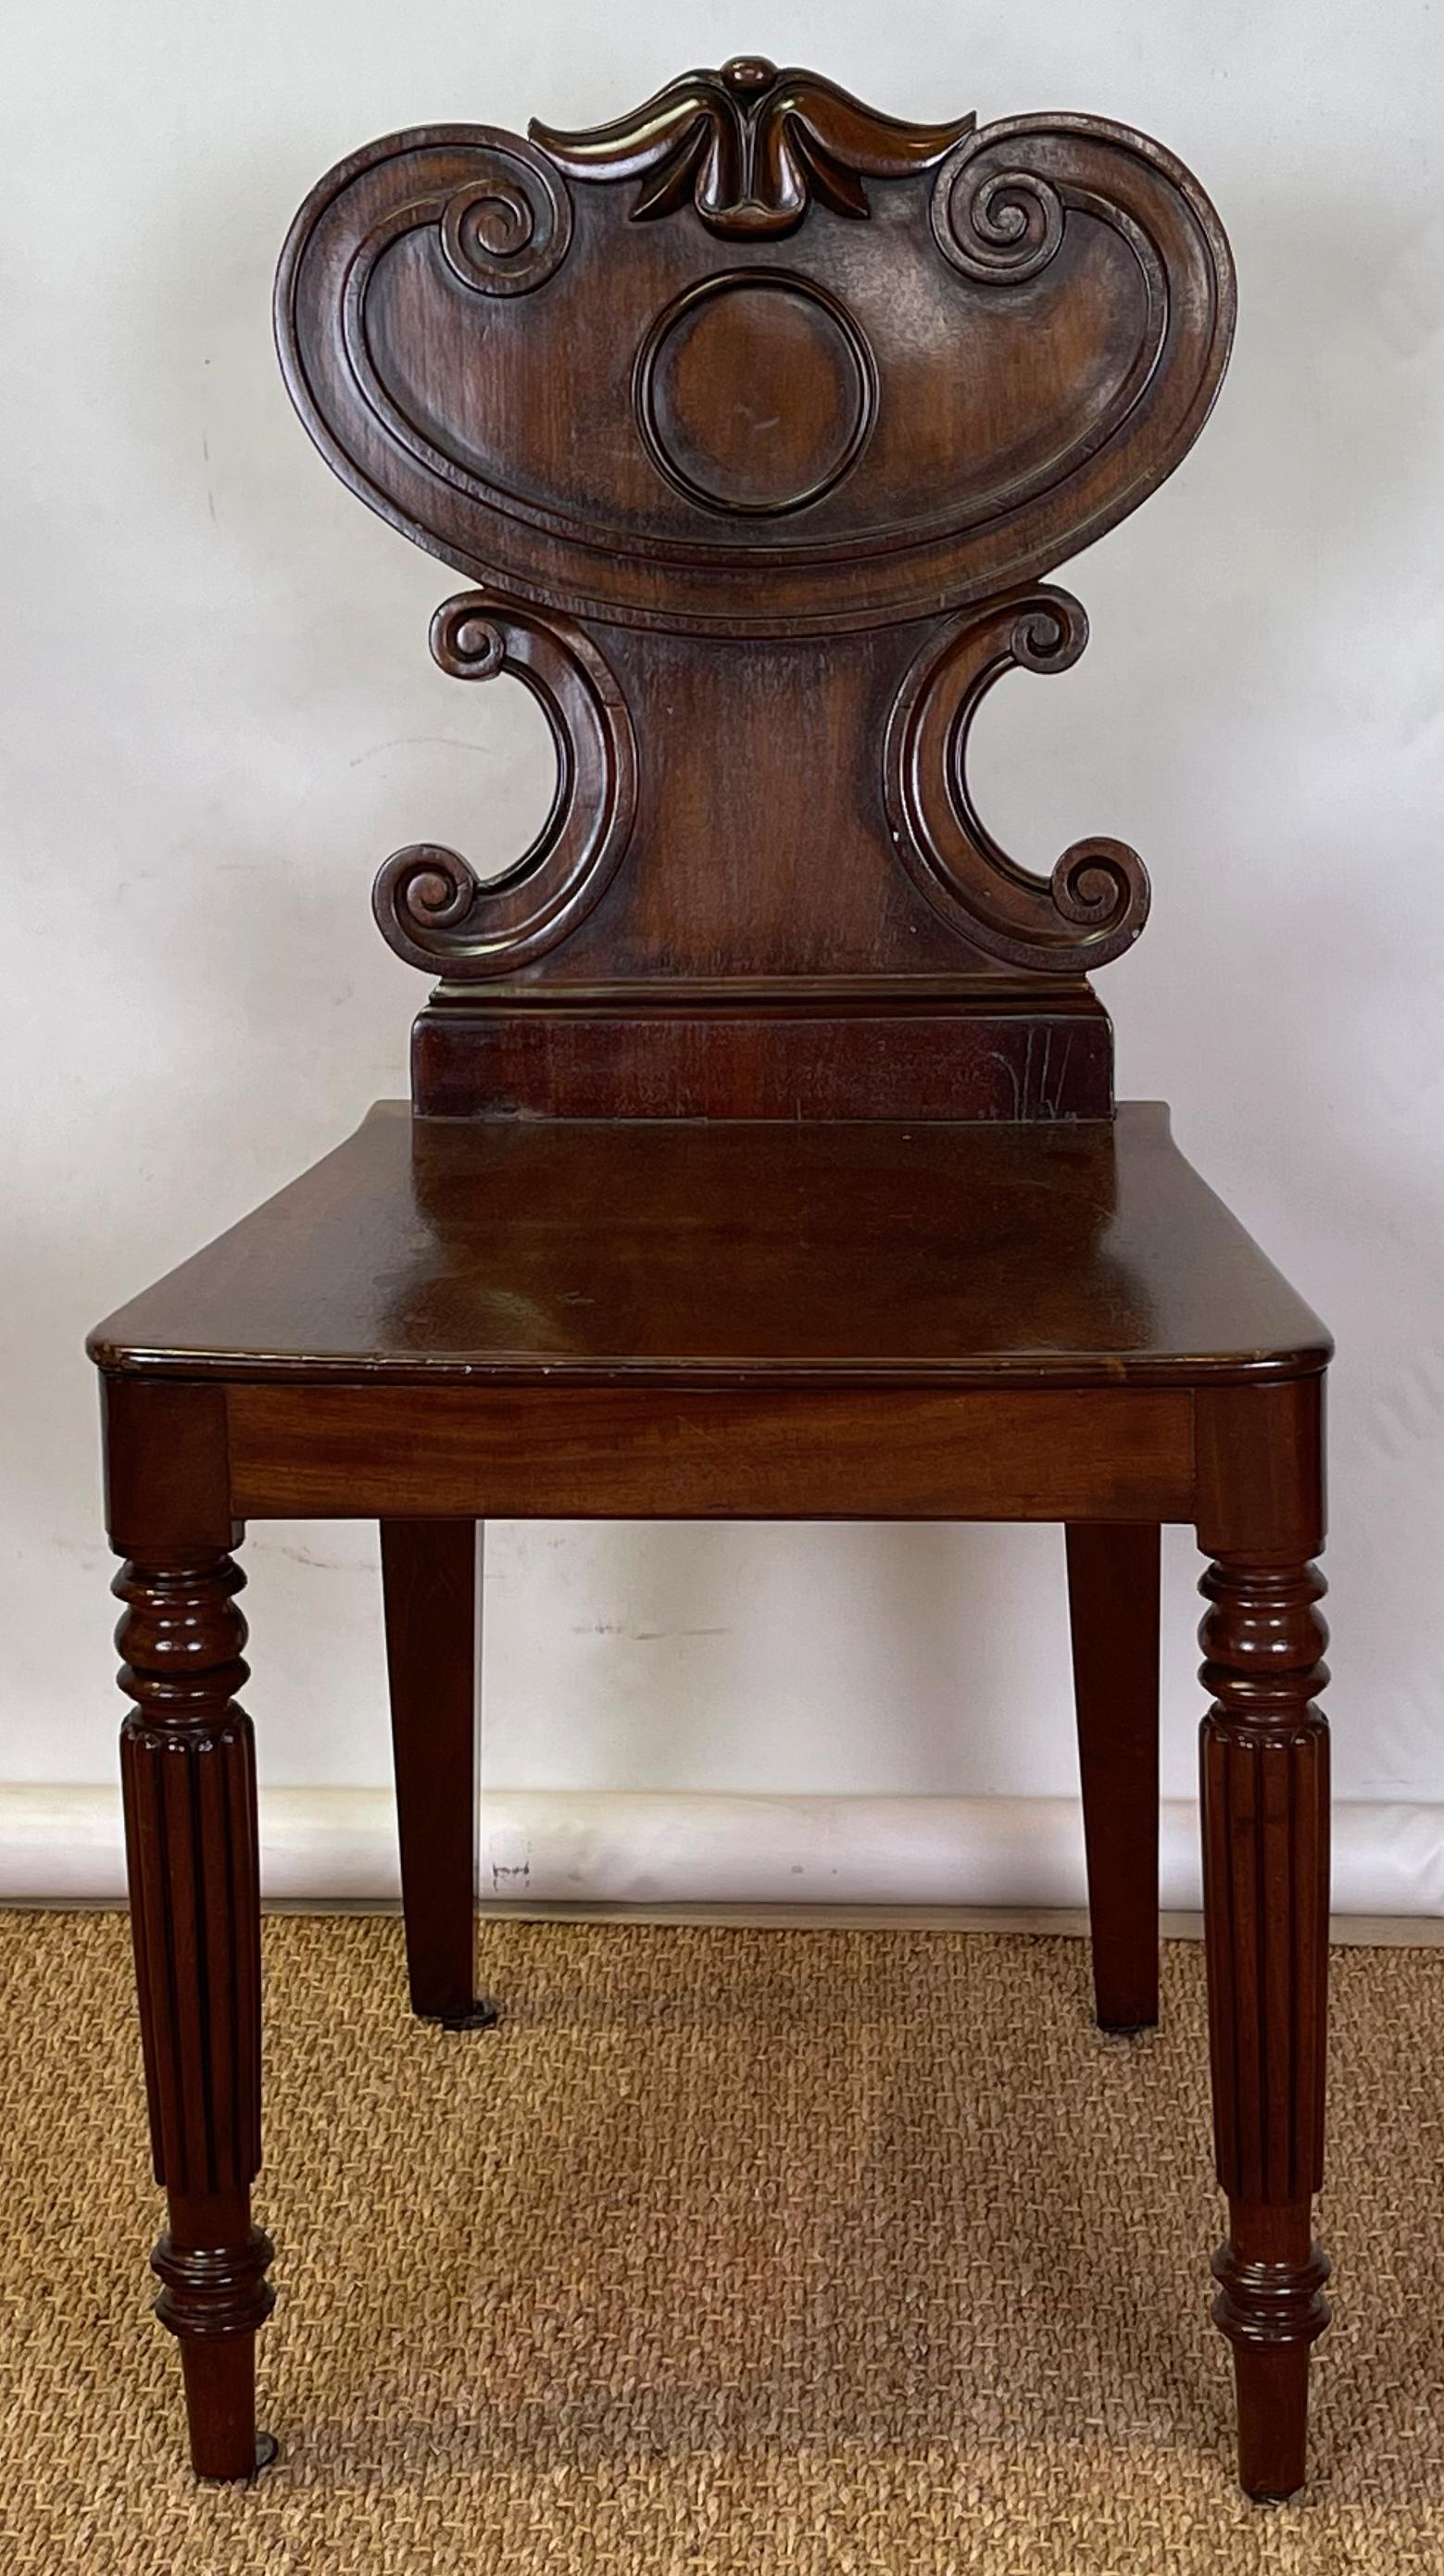 An early 19th C. English mahogany hall chair with cartouche shaped back resting on round reeded legs.